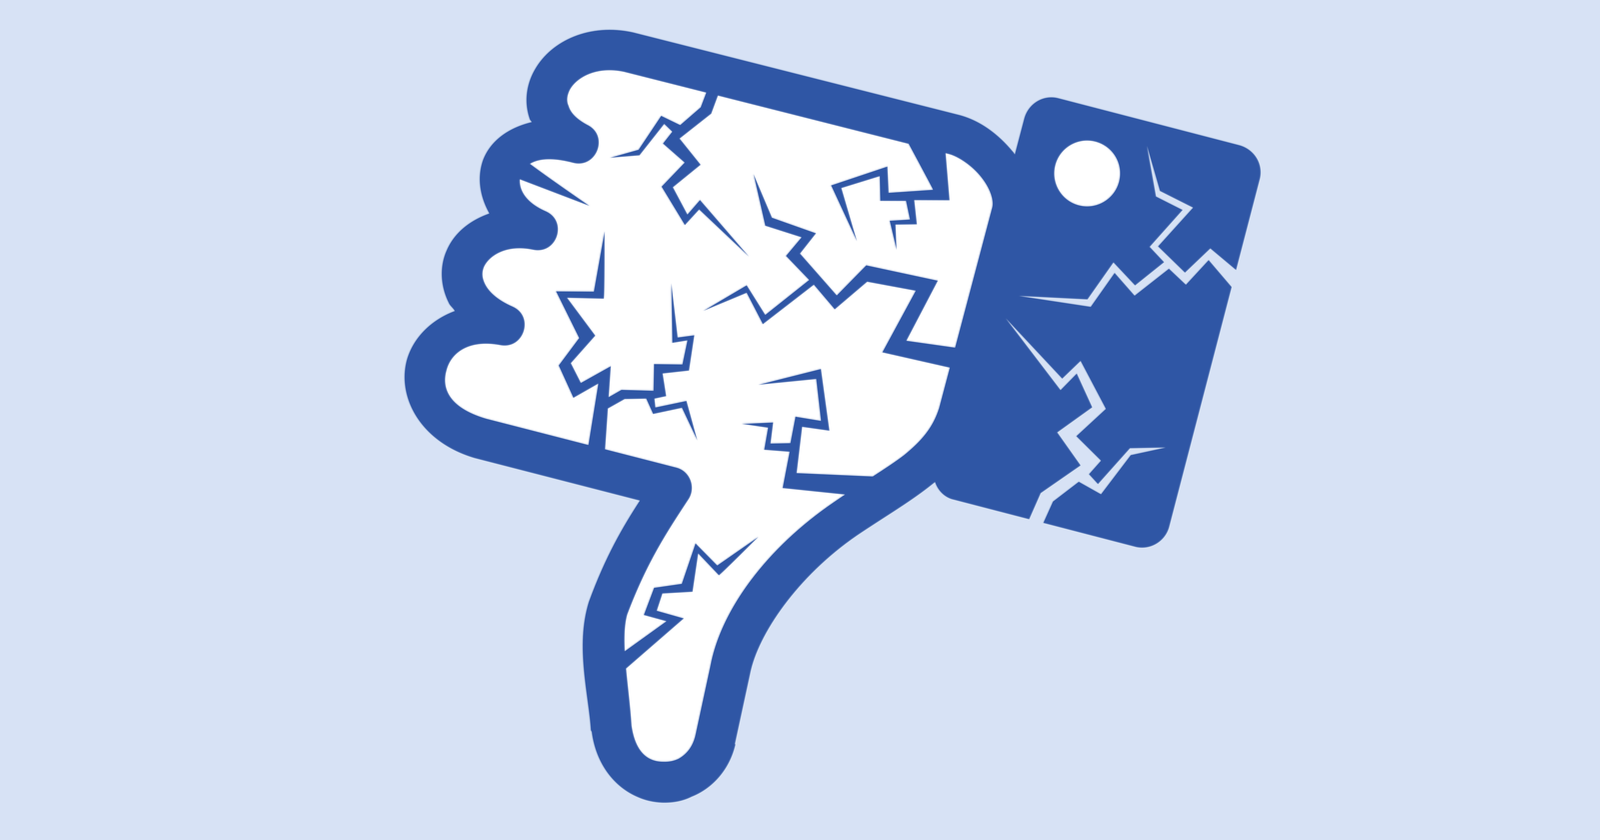 Facebook says sorry for mass outage and reveals why it happened